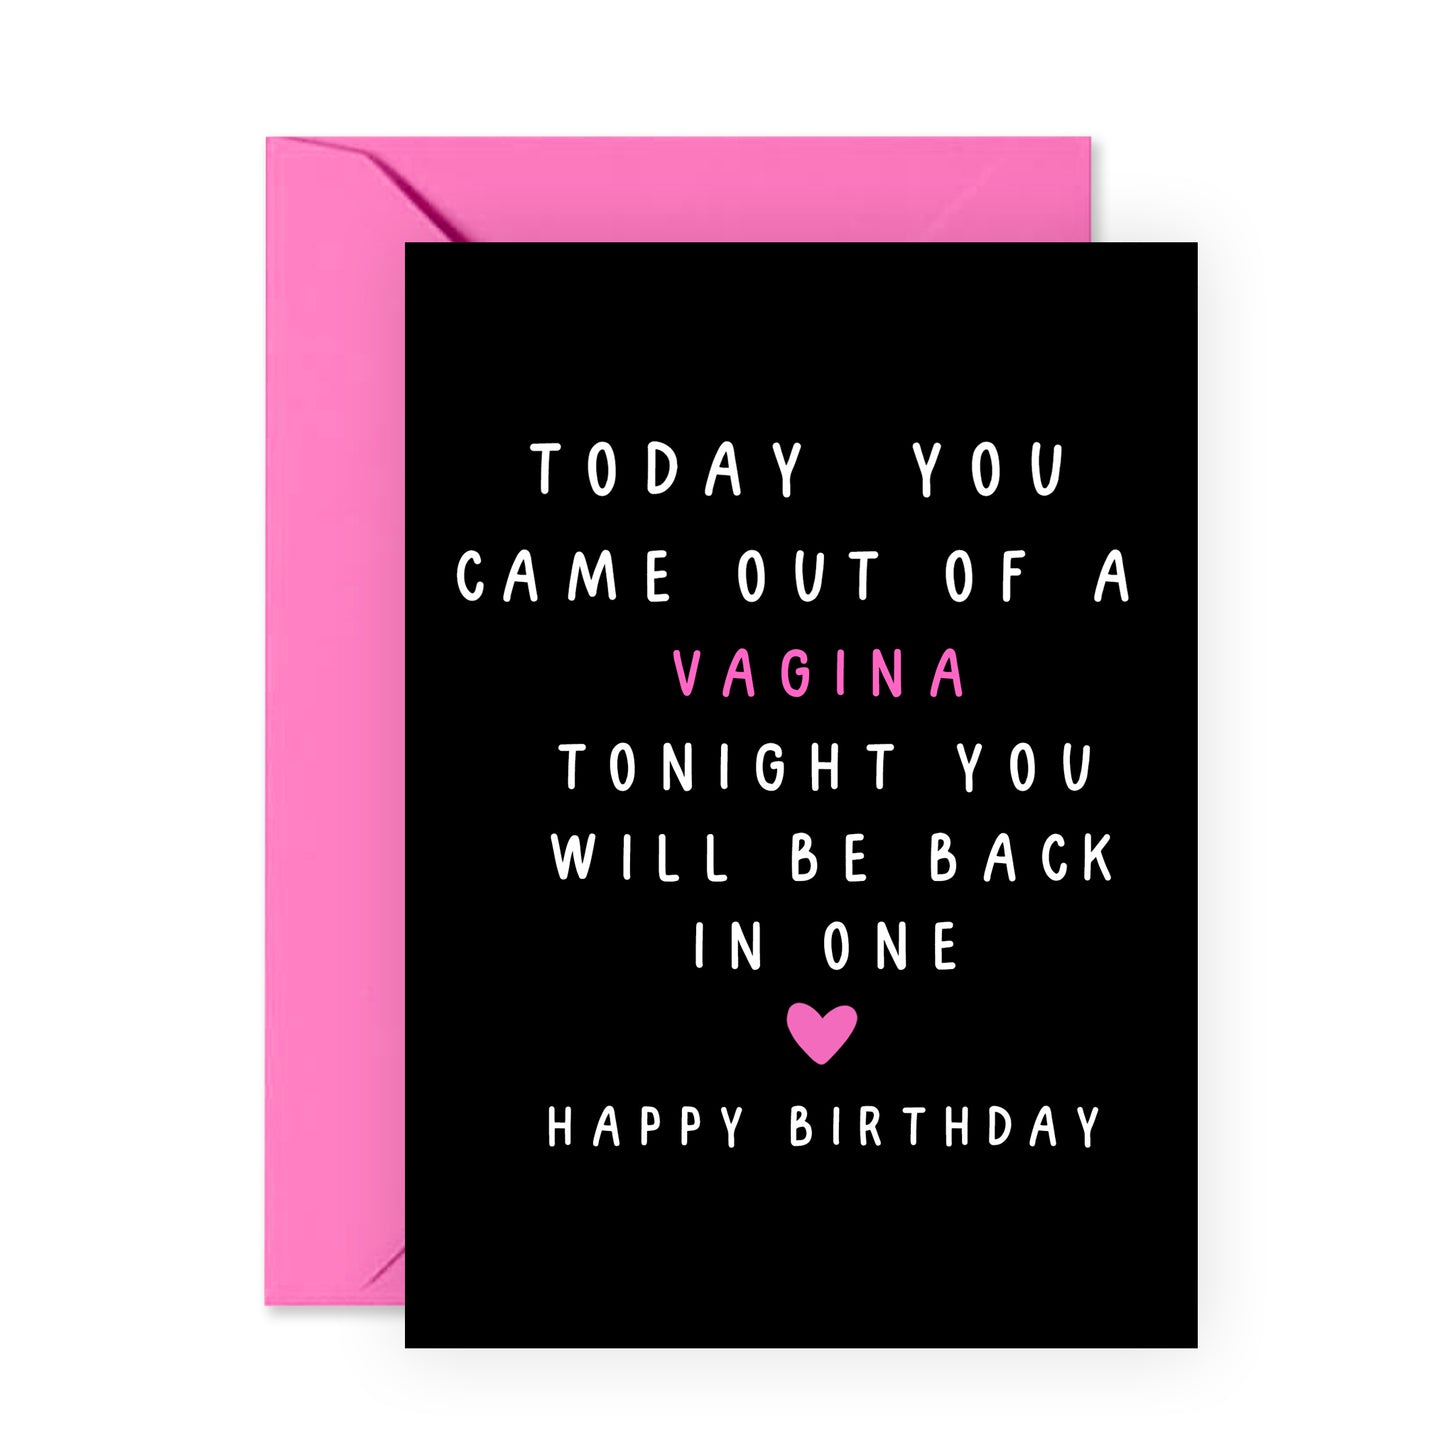 Funny Birthday Card - Today You Came Out Of A V*gina - For Men Boyfriend Husband